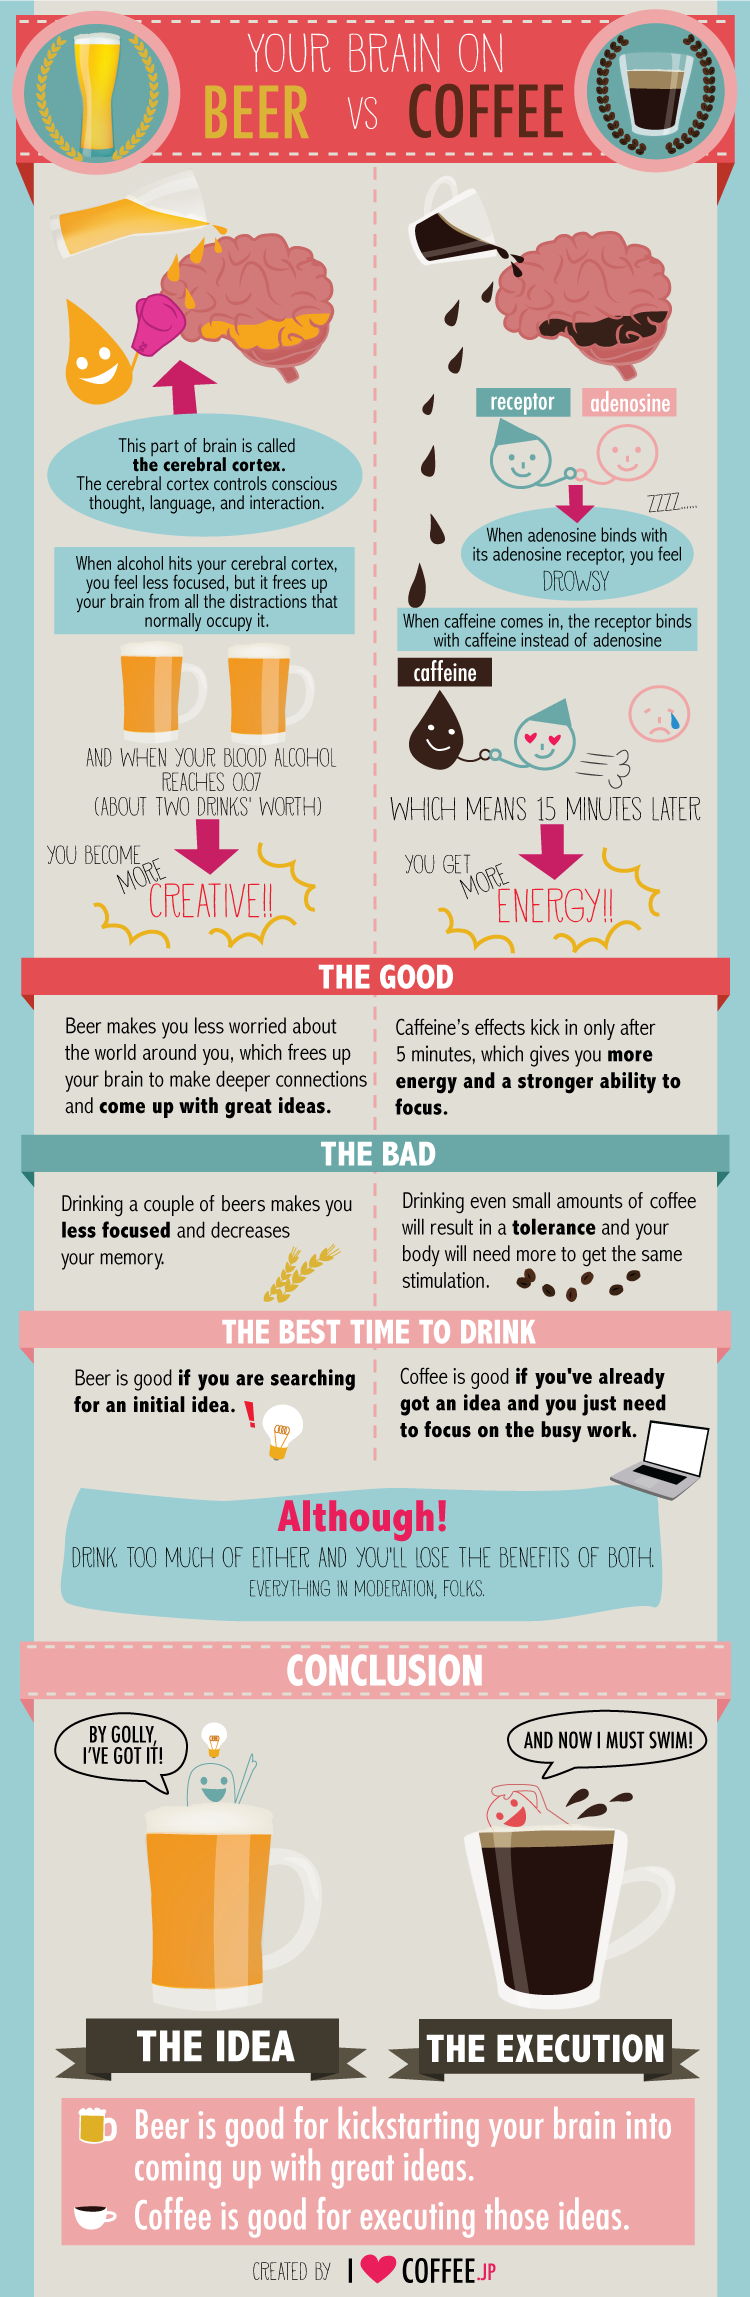 An infographic describing the different effects of beer and coffee on productivity